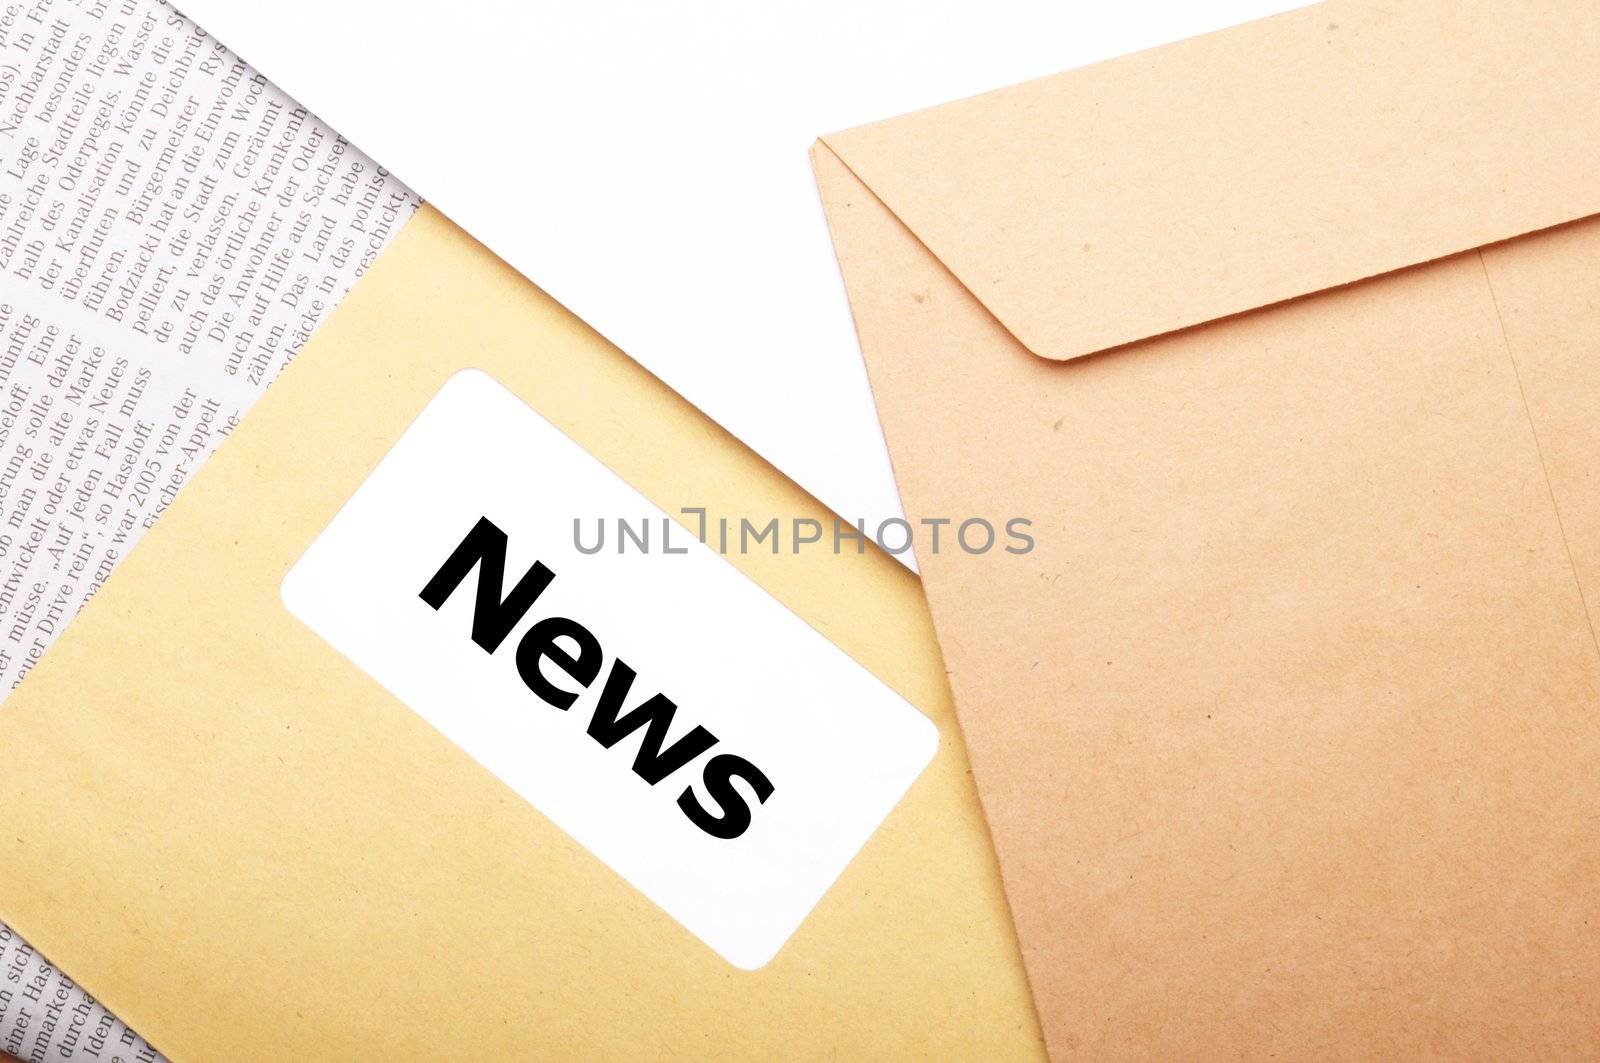 new or newsletter concept with envelope and word